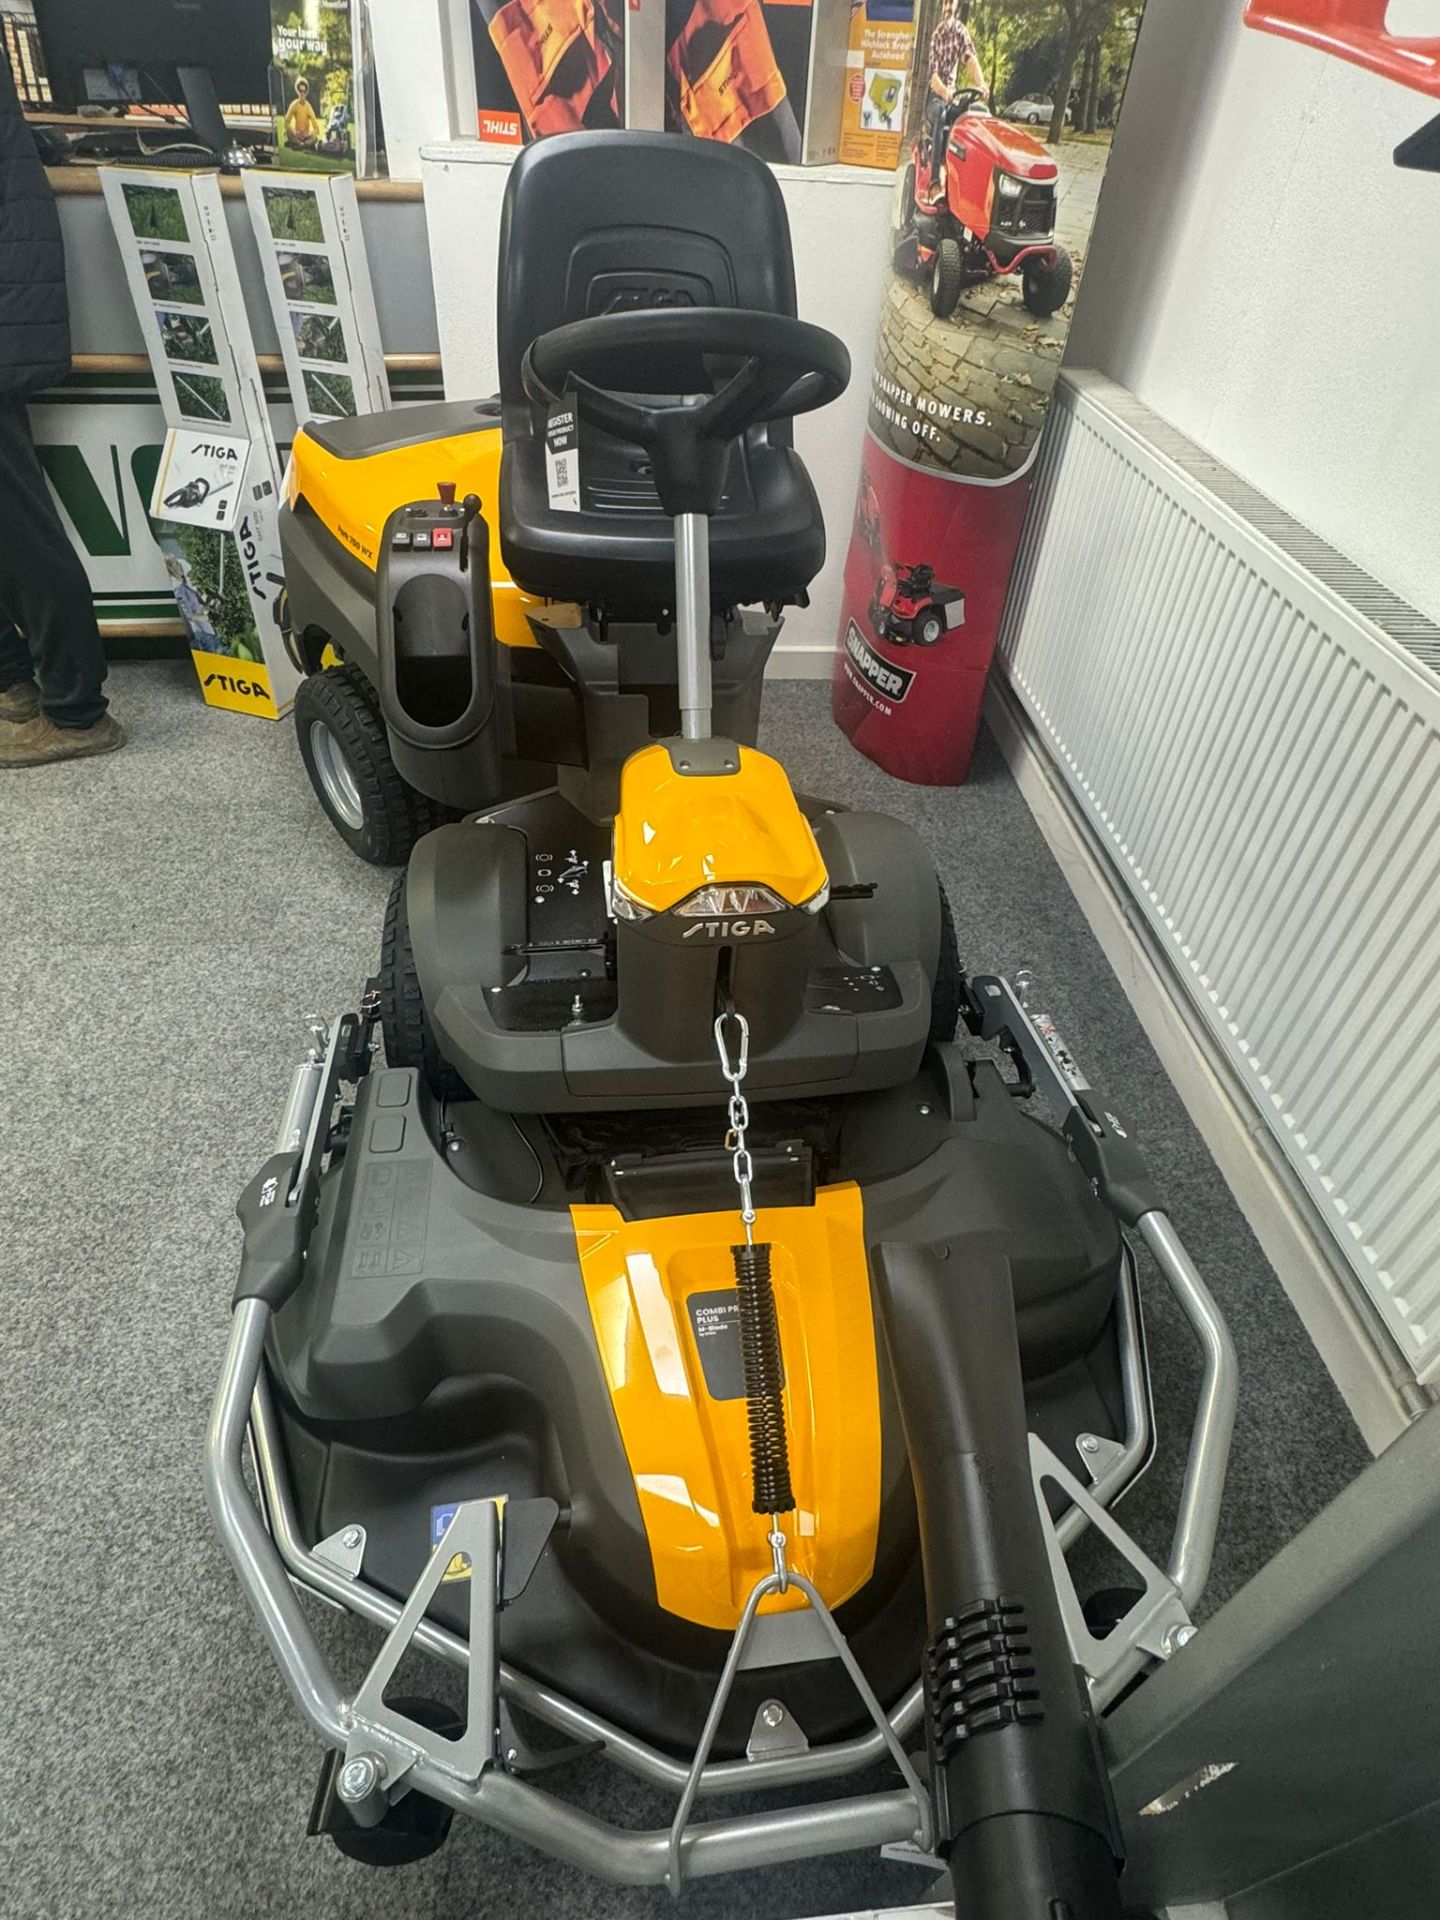 NEW/UNUSED STIGA PARK 700 WX RIDE ON LAWN MOWER 4X4 OUT FRONT *PLUS VAT* - Image 3 of 16